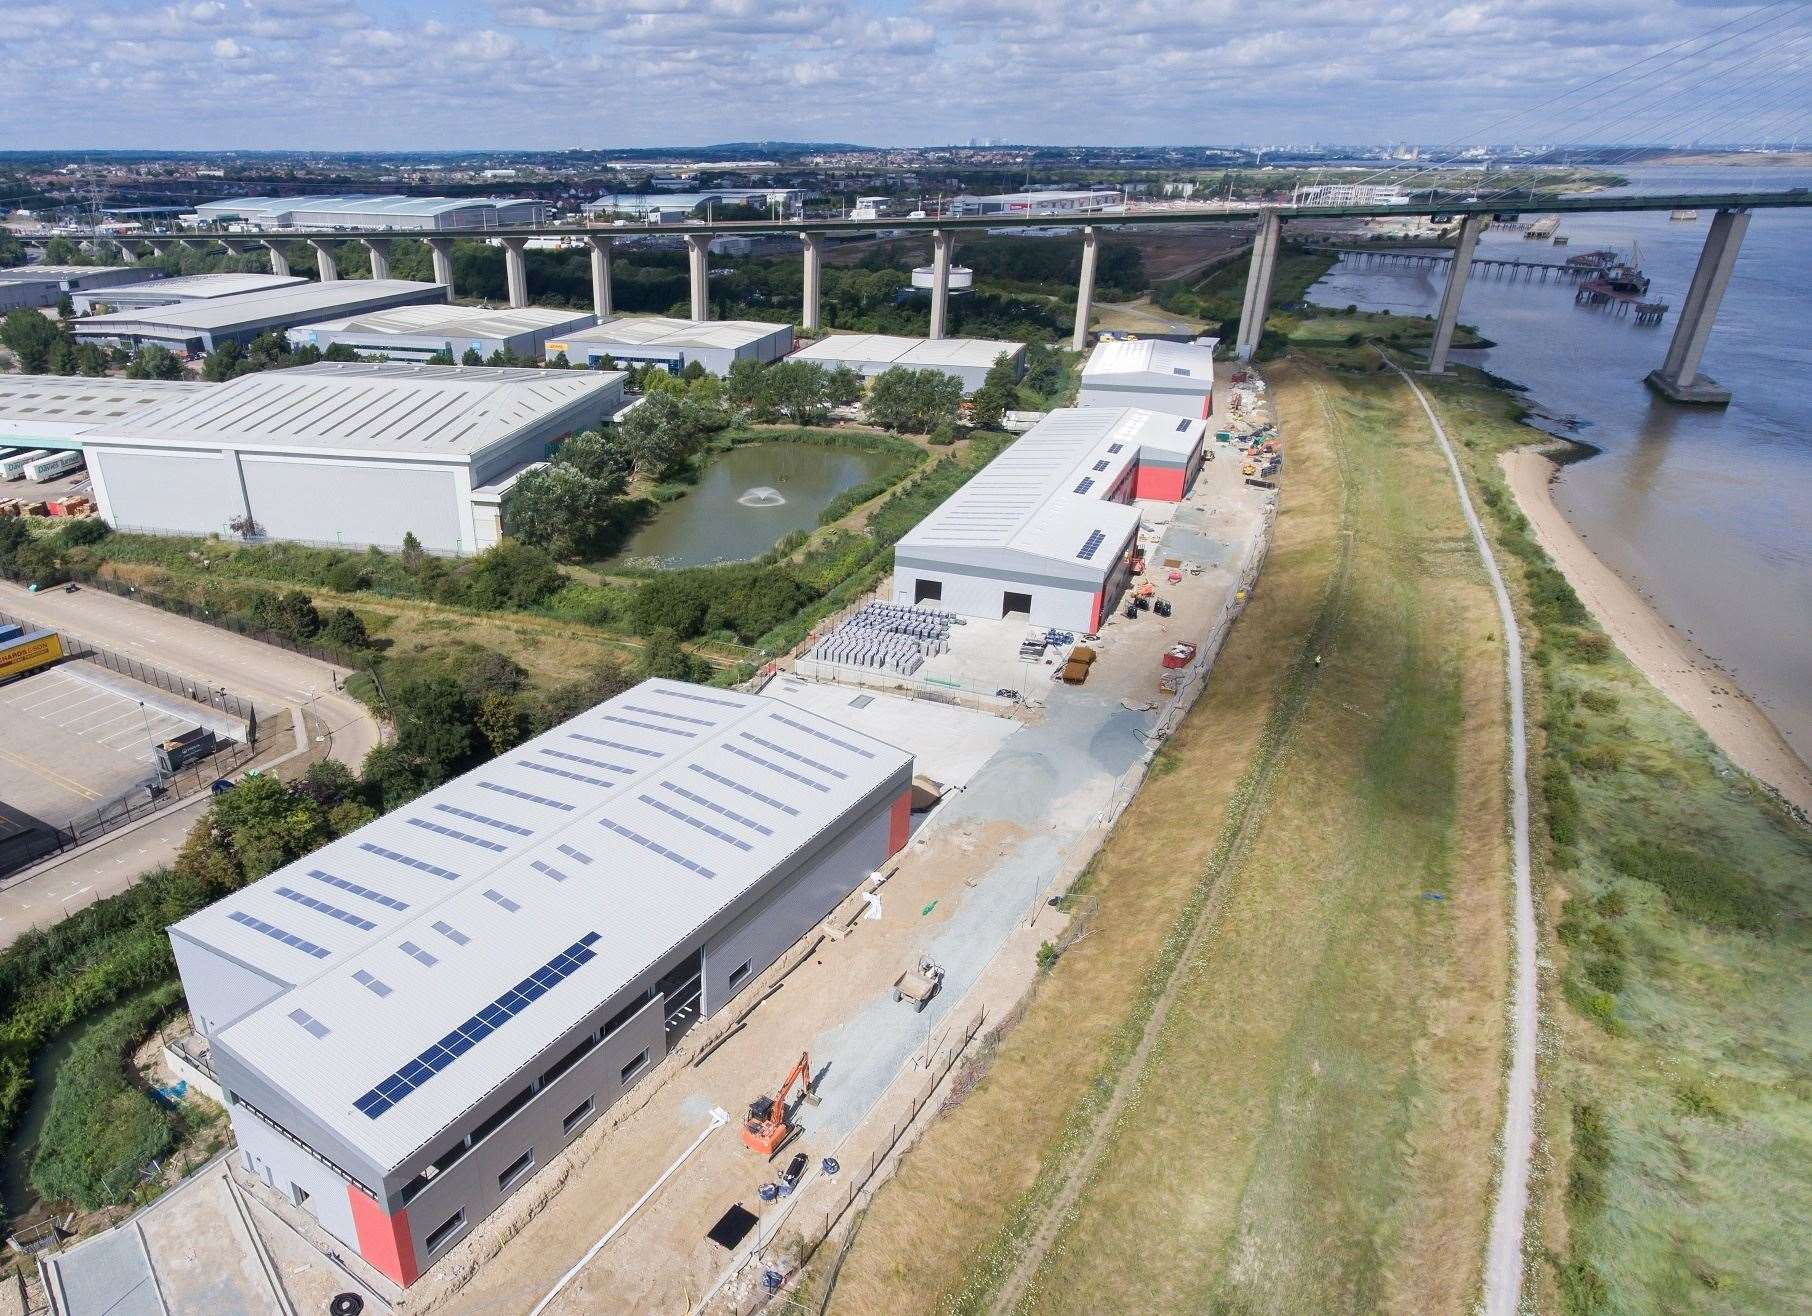 Chancerygate has pre-sold 70 per cent of the Panorama industrial scheme in Dartford ahead of practical completion